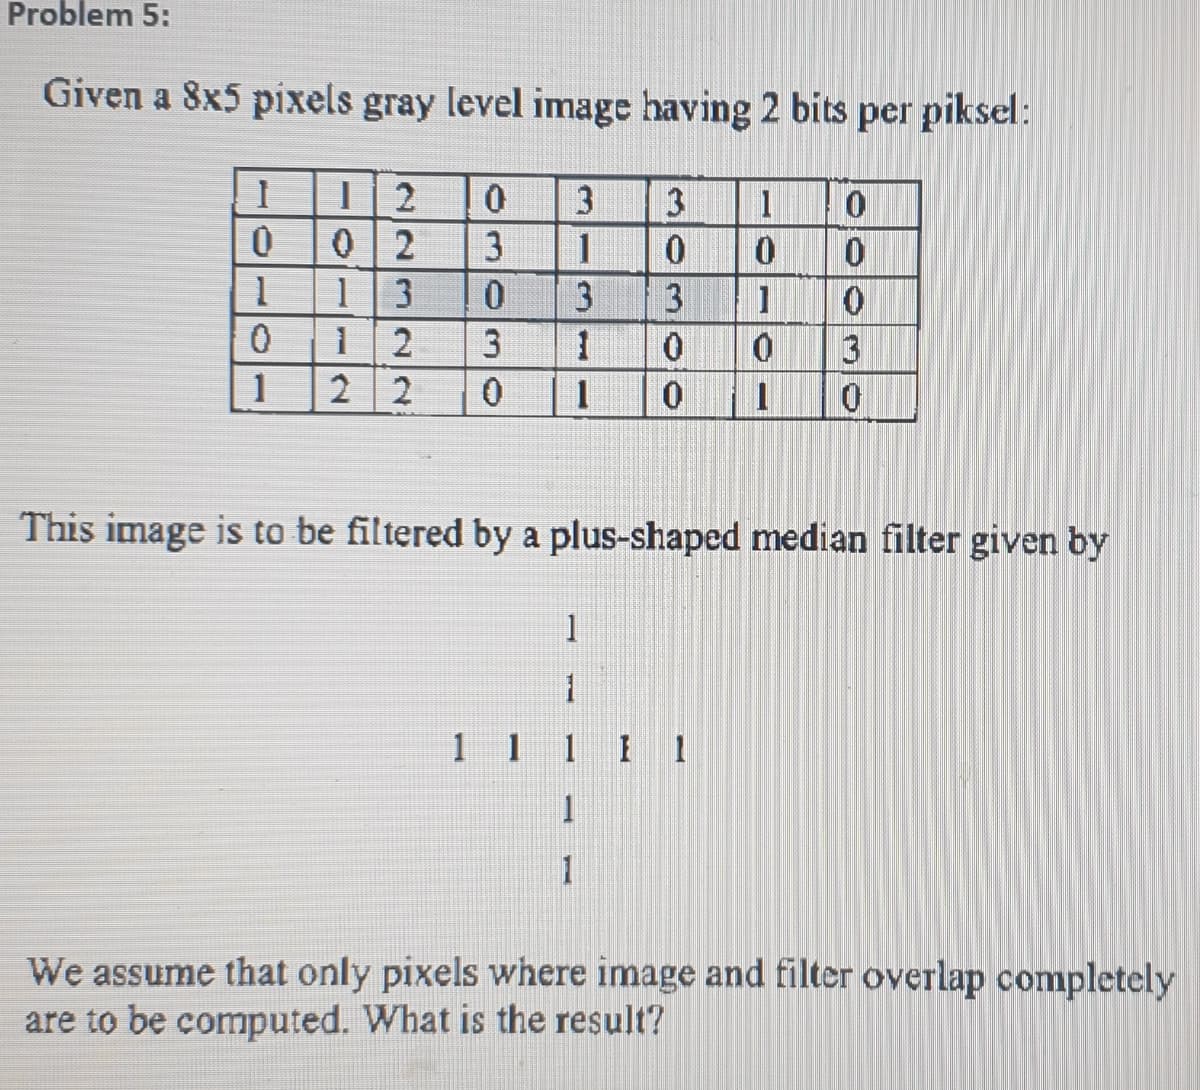 Problem 5:
Given a 8x5 pixels gray level image having 2 bits per piksel:
3
3
1
3
1
1
3
3
1
2
1
2
This image is to be filtered by a plus-shaped median filter given by
1 1 1 1 1
1.
1
We assume that only pixels where image and filter overlap completely
are to be computed. What is the result?
